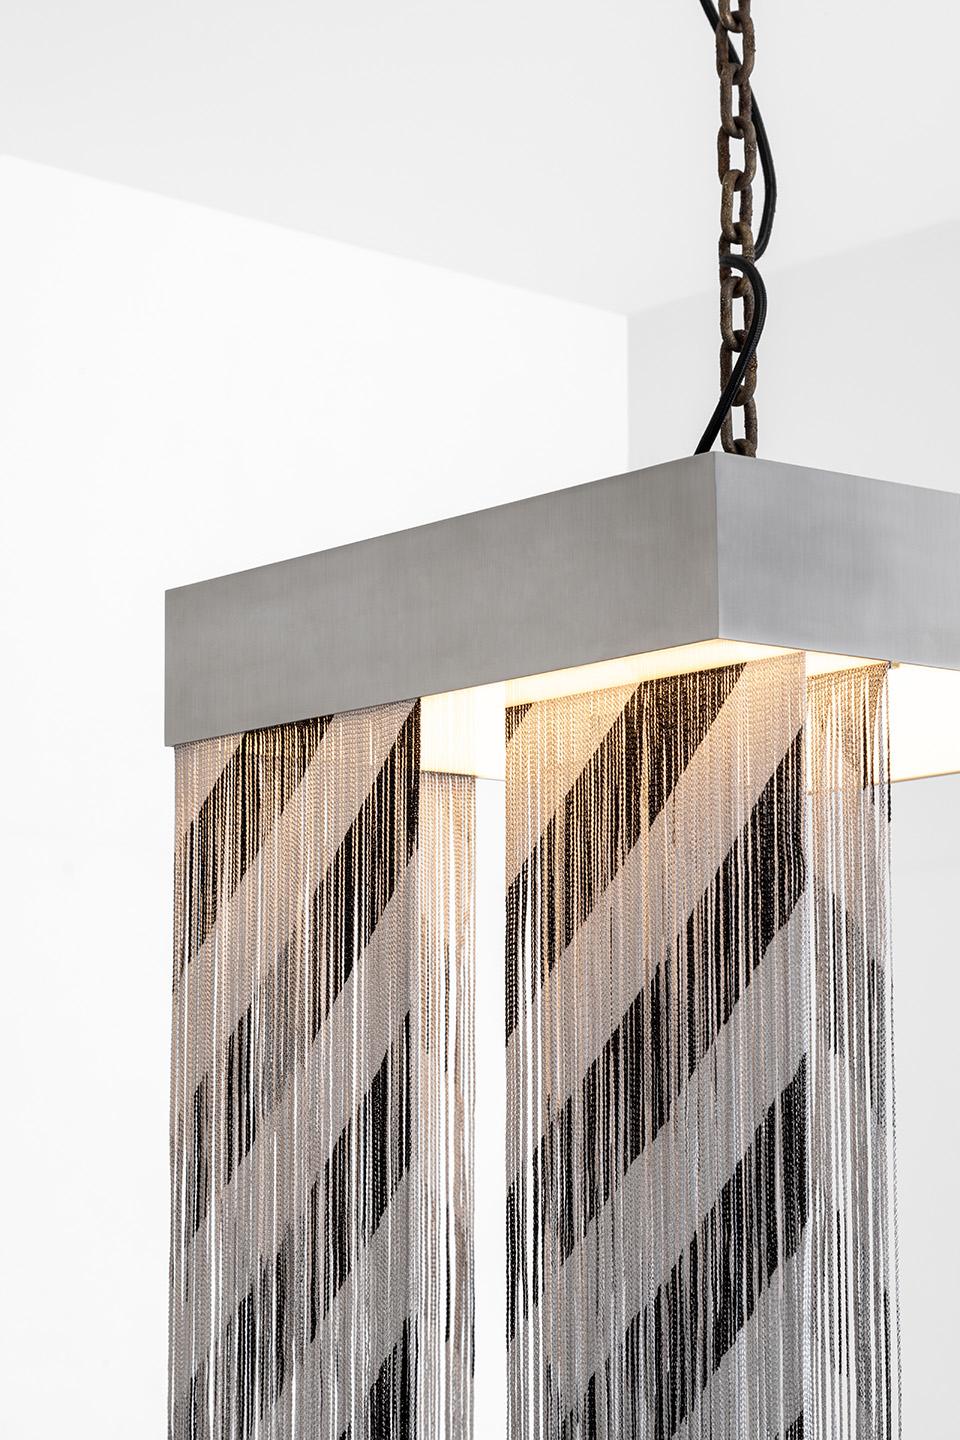 CHARLESTON Ceiling Lamp in Brushed Steel, Brass and Fringes by Dimoremilano In New Condition For Sale In Milan, IT